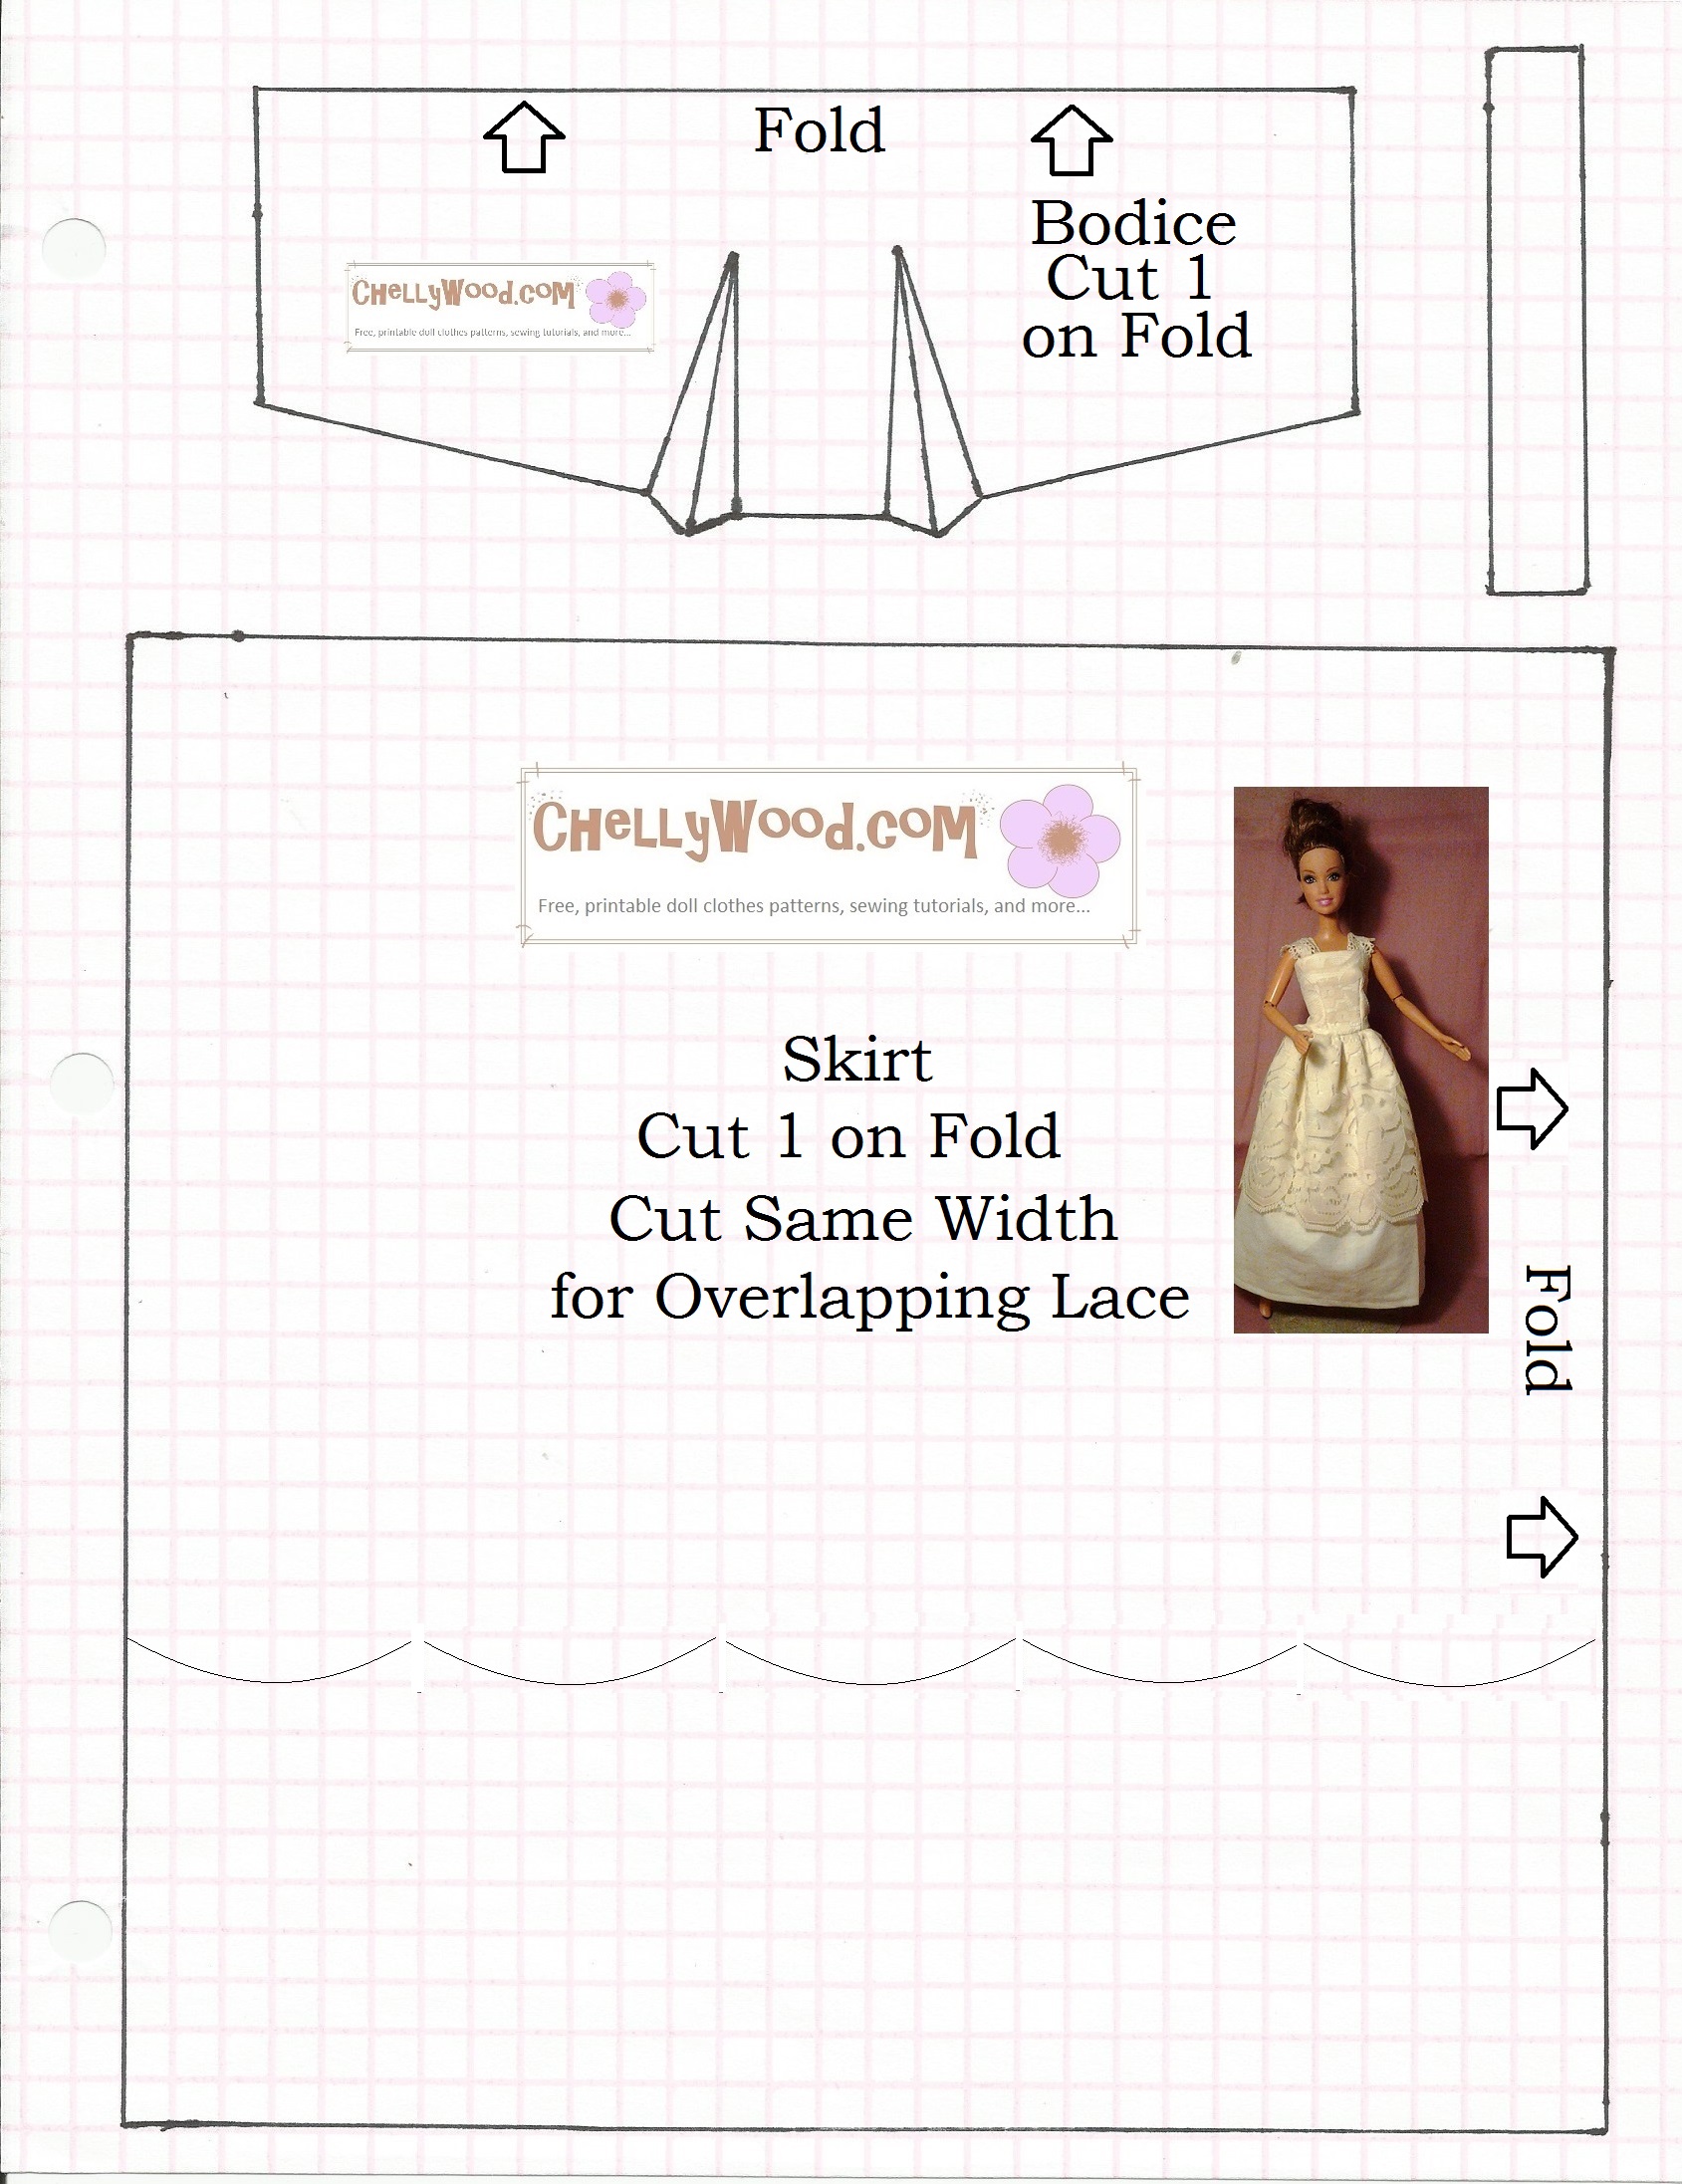 Old Pattern Page – Free Doll Clothes Patterns